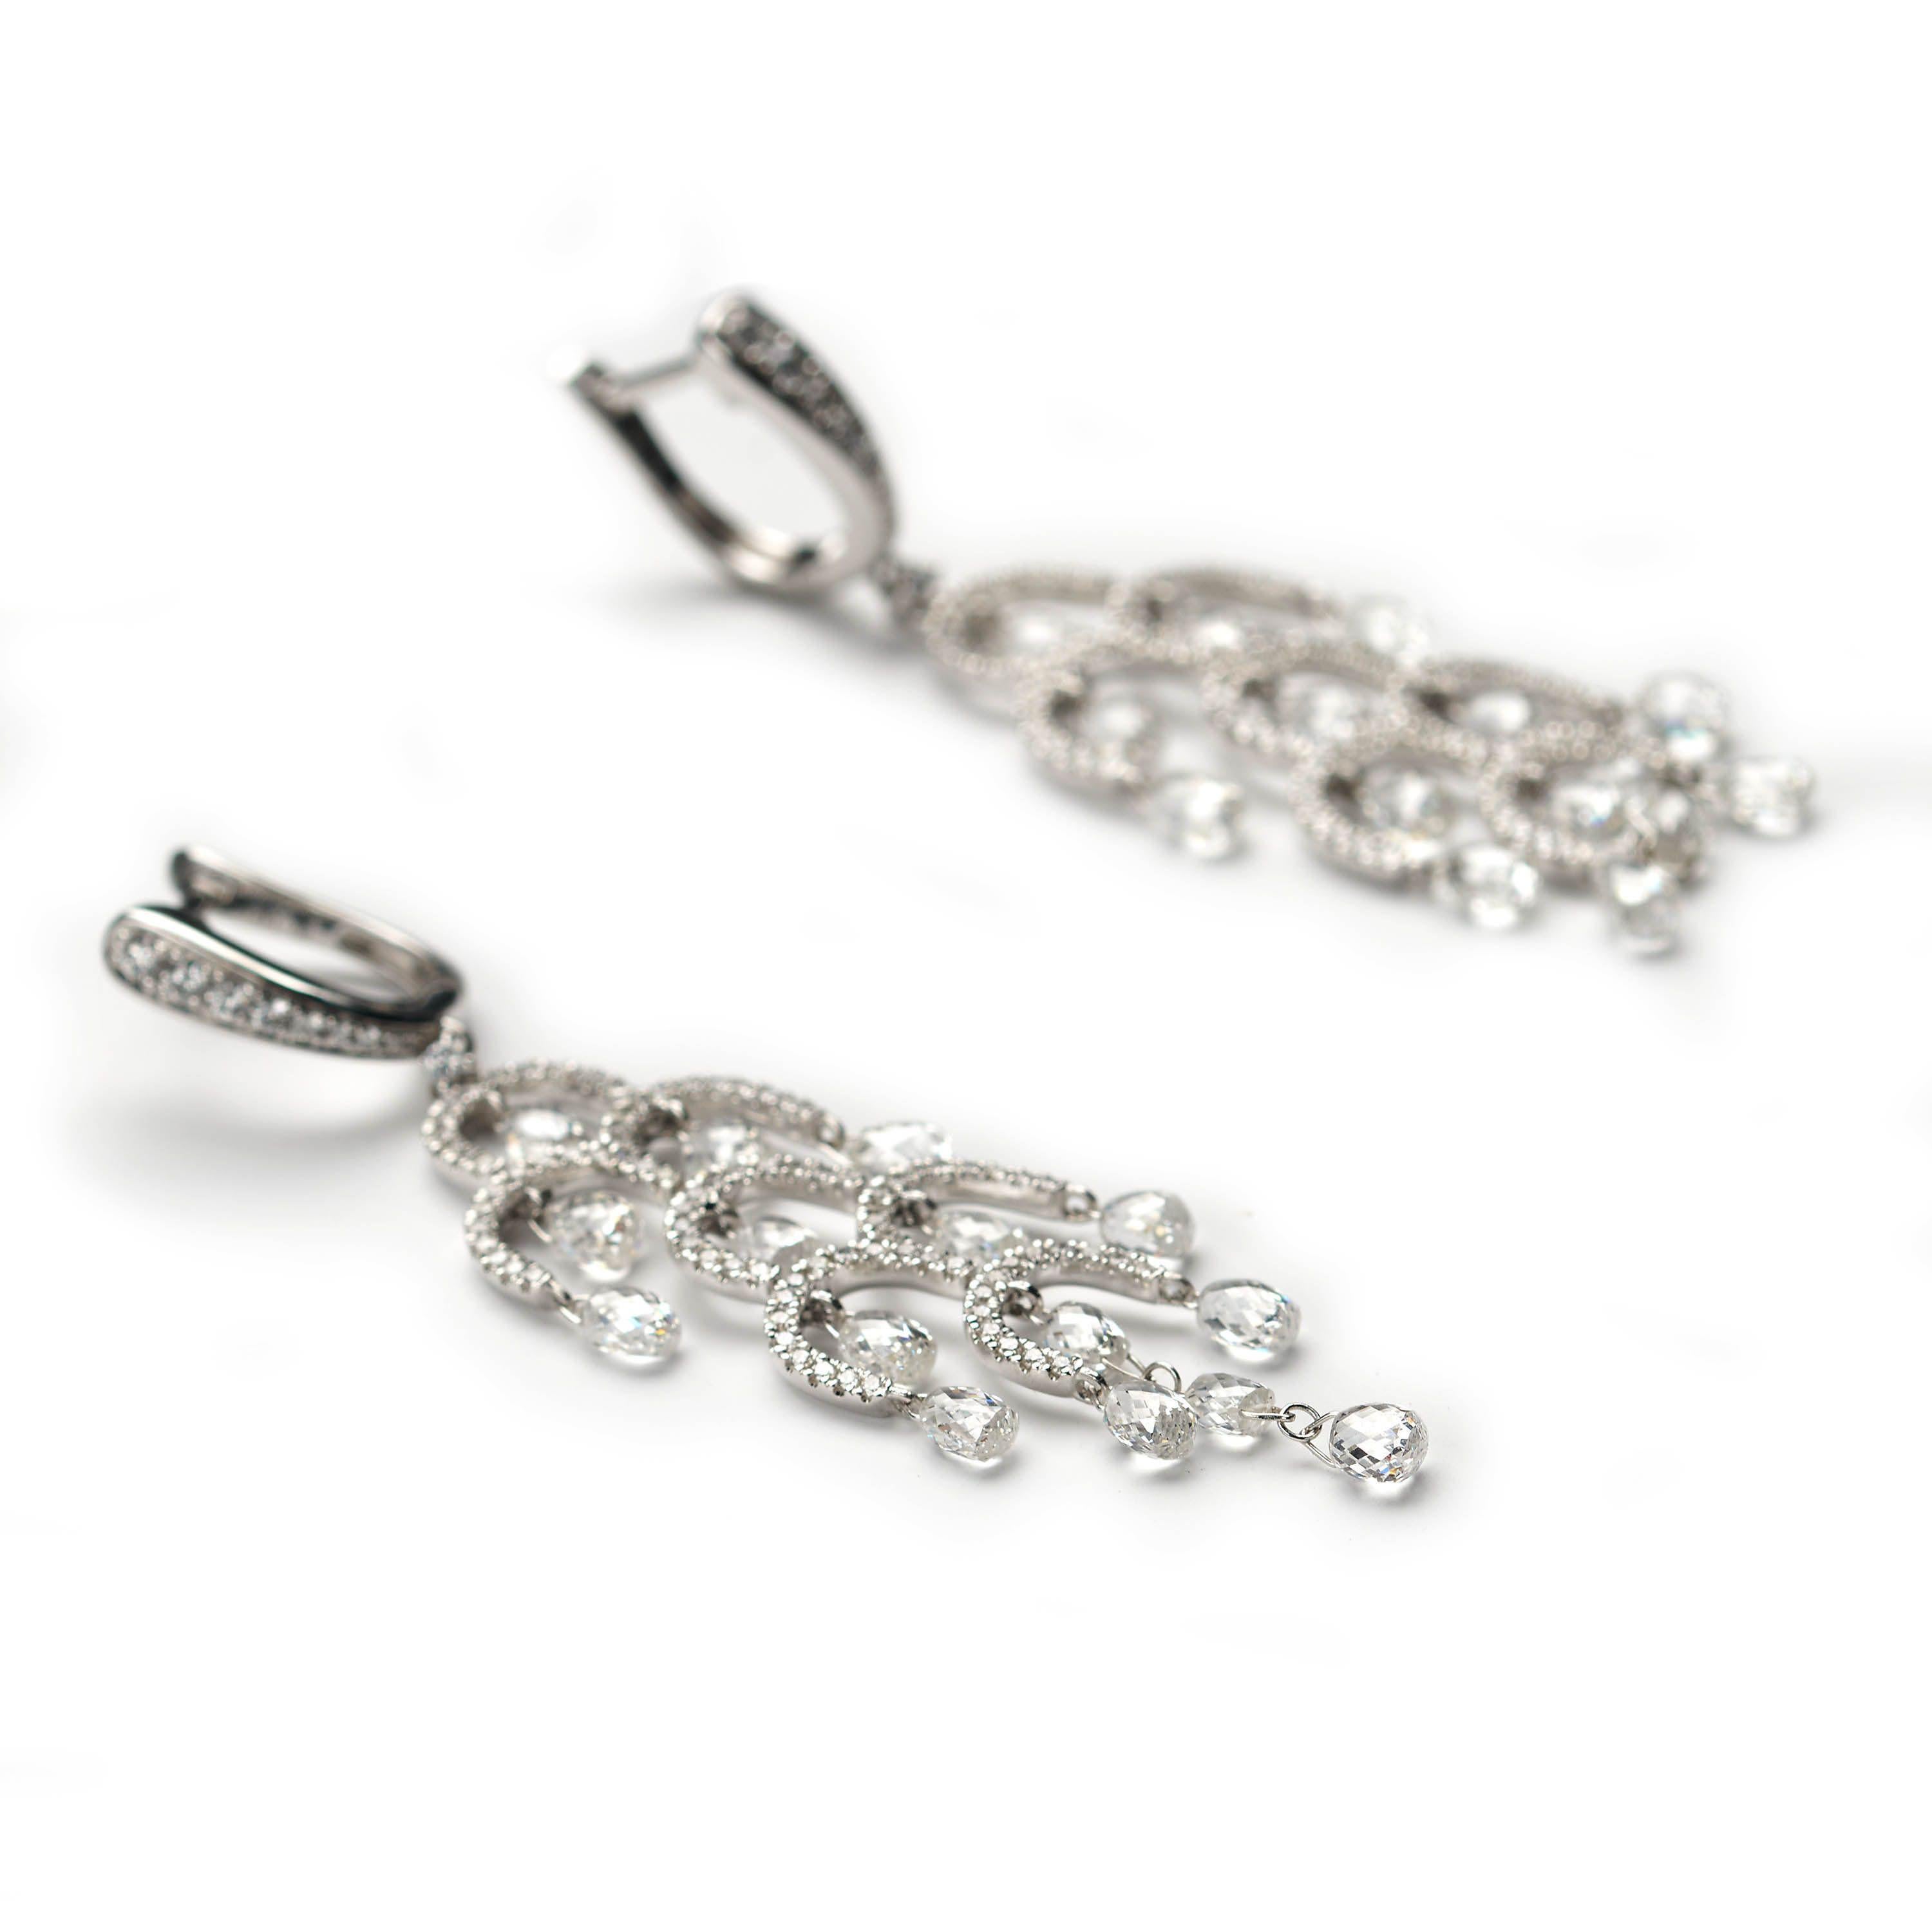 Briolette Cut Modern Briolette Diamond And White Gold Drop Earrings, 7.92 Carats For Sale